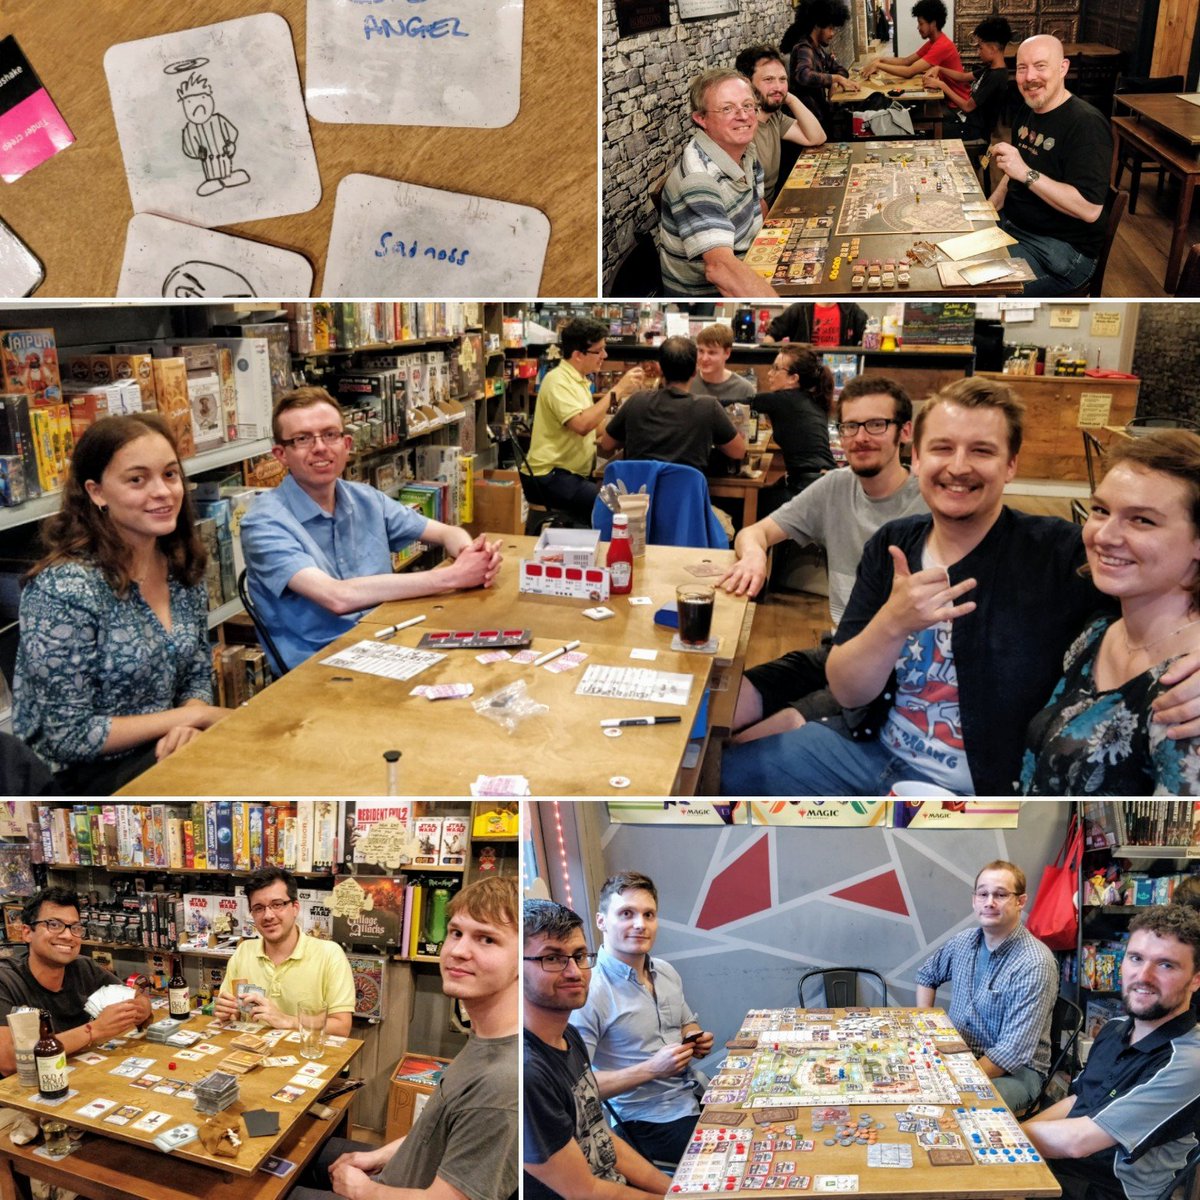 Tonight at Open Gaming there's a whole range of games being played, including Scrawl, Trickerion, Decrypto, The Binding of Isaac and Great Western Trail. Open Gaming is held every Tuesday evening so come check it out! #opengaming #boardgames #watford #newbiefriendly #dontbescared